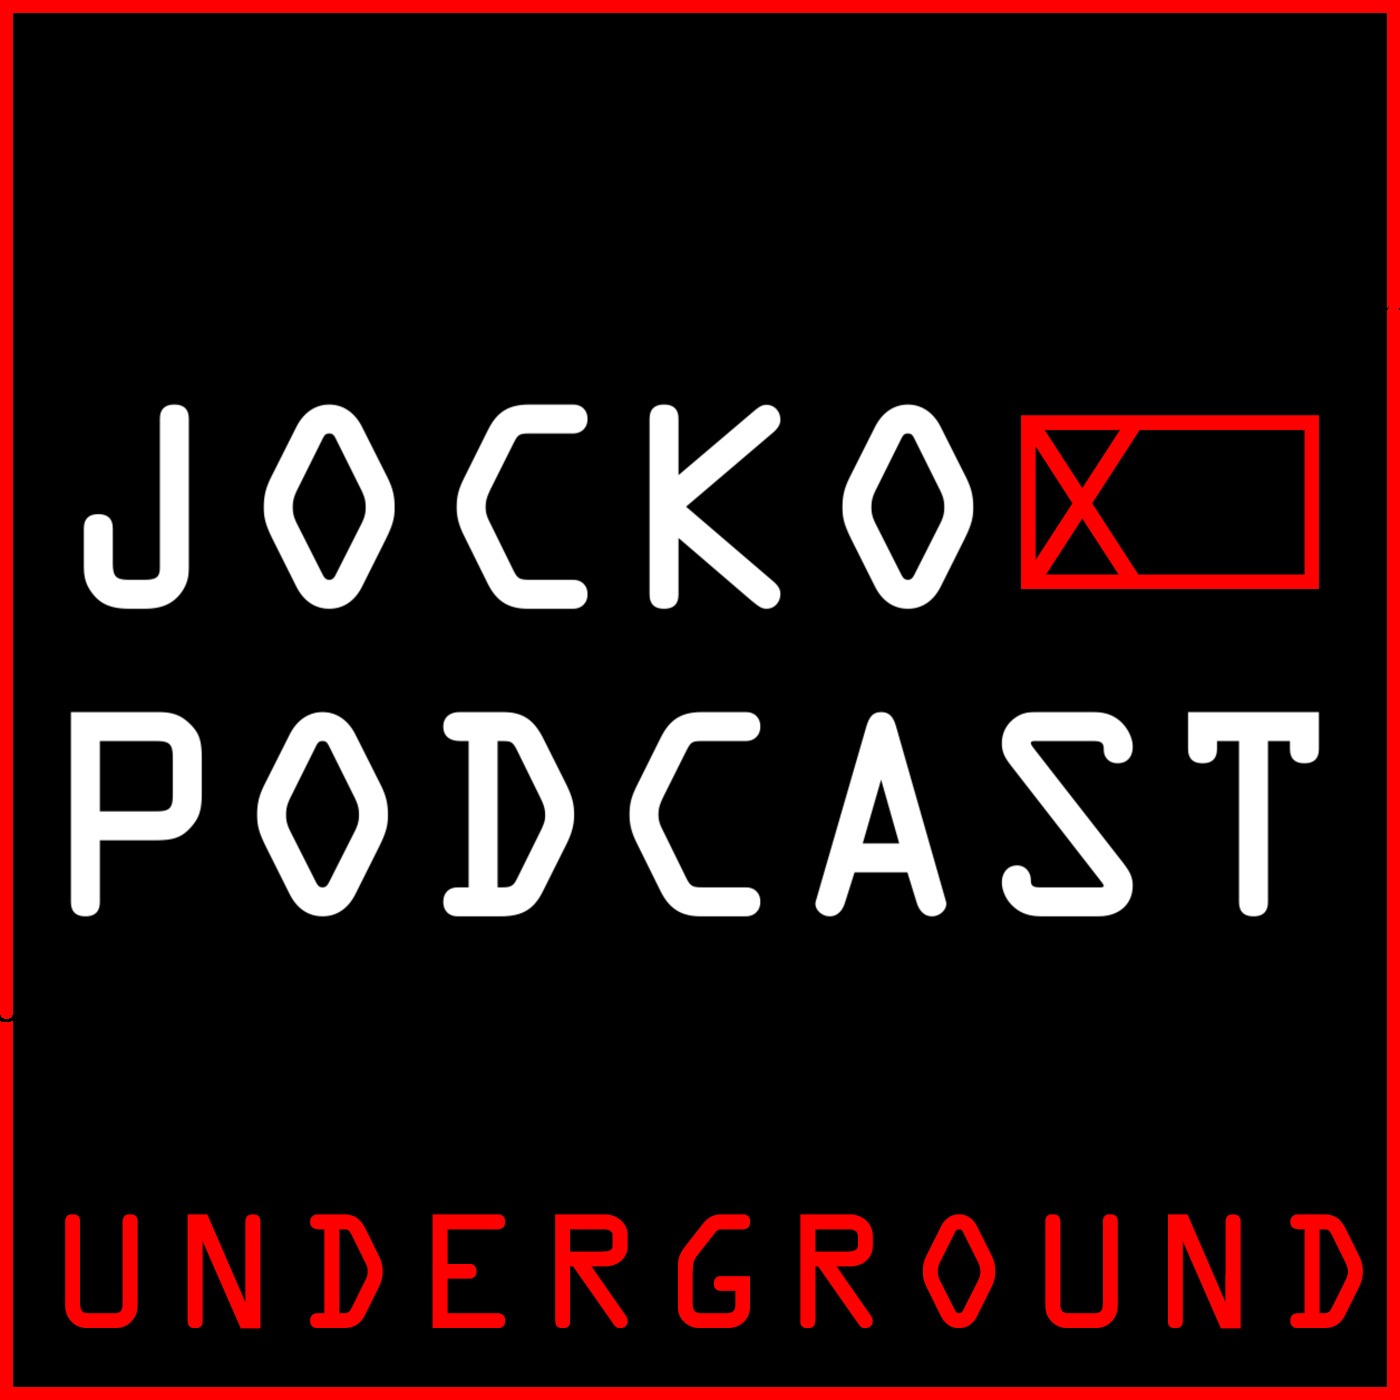 Jocko Underground: Rise Above. How To Get Back On Your Feet in Life.